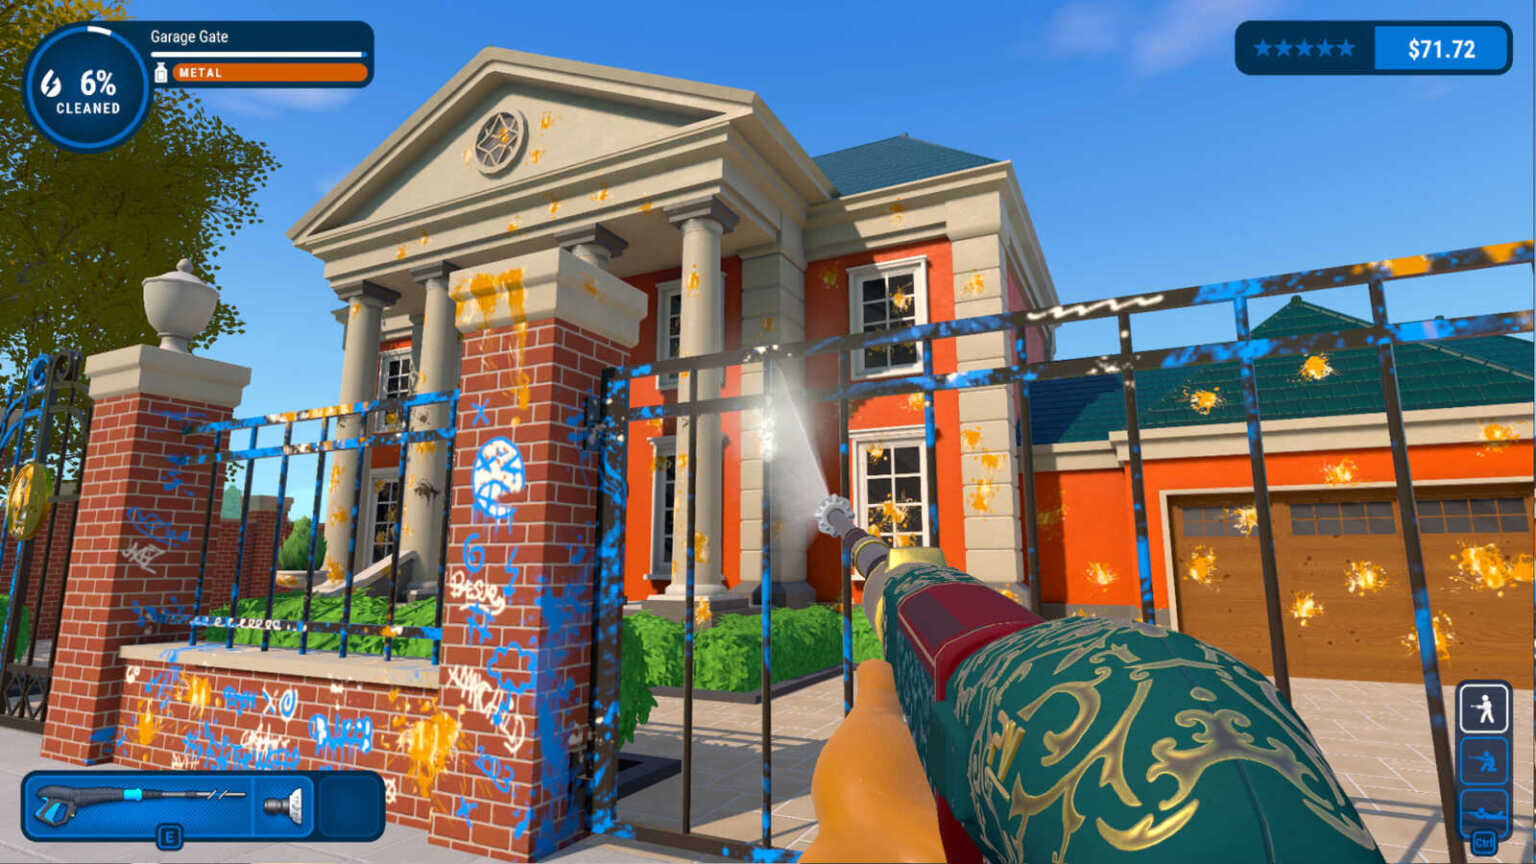 PowerWash Simulator VR review – the only way to power wash